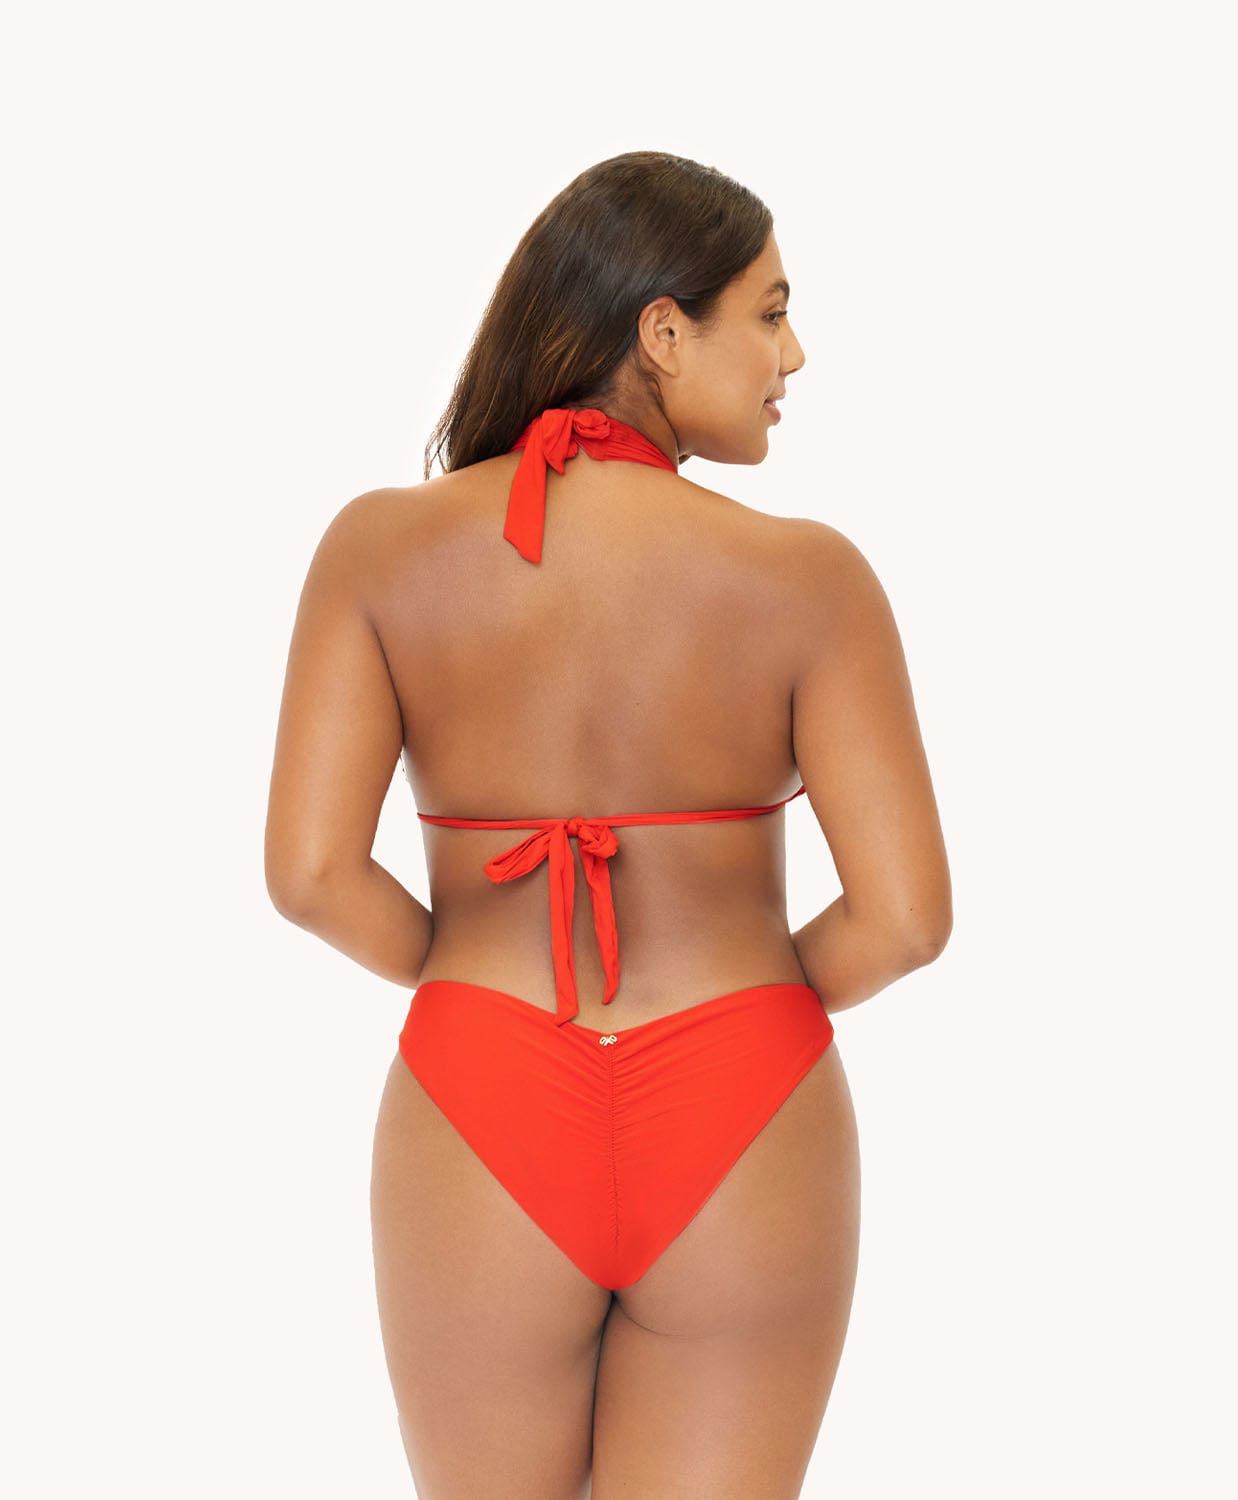 Back view of brunette woman wearing a neon orange bikini in front of a white background. 